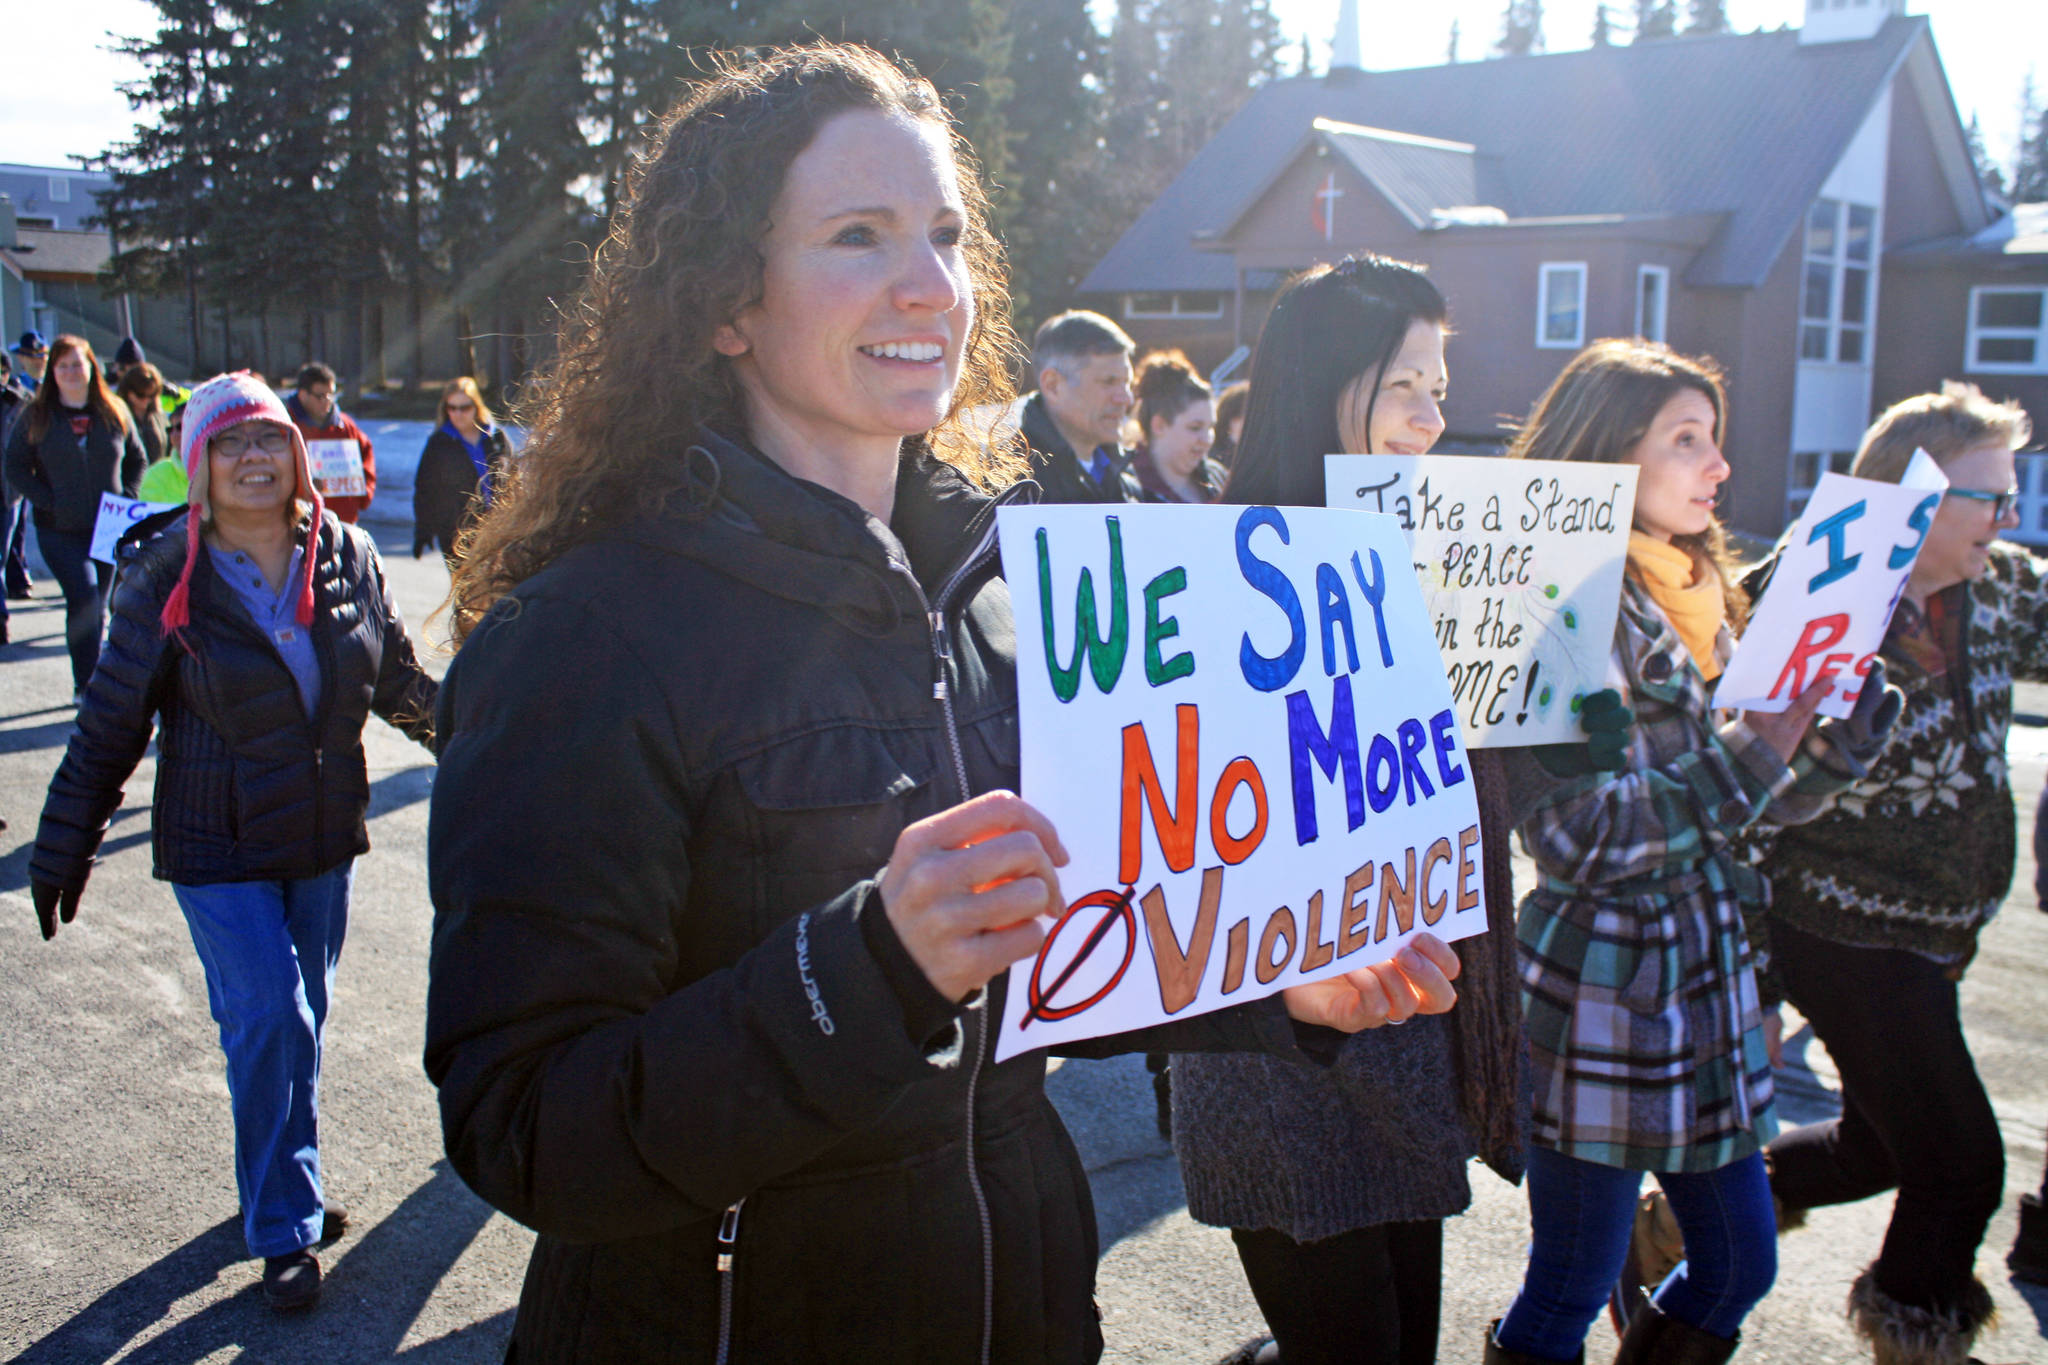 A woman protests against violence during the Alaskans Choose Respect Awareness Event, hosted by the LeeShore Center, on Wednesday, March 28 in Kenai. The march aimed to draw attention to the issue of sexual assault and domestic violence. (Photo by Erin Thompson/Peninsula Clarion)